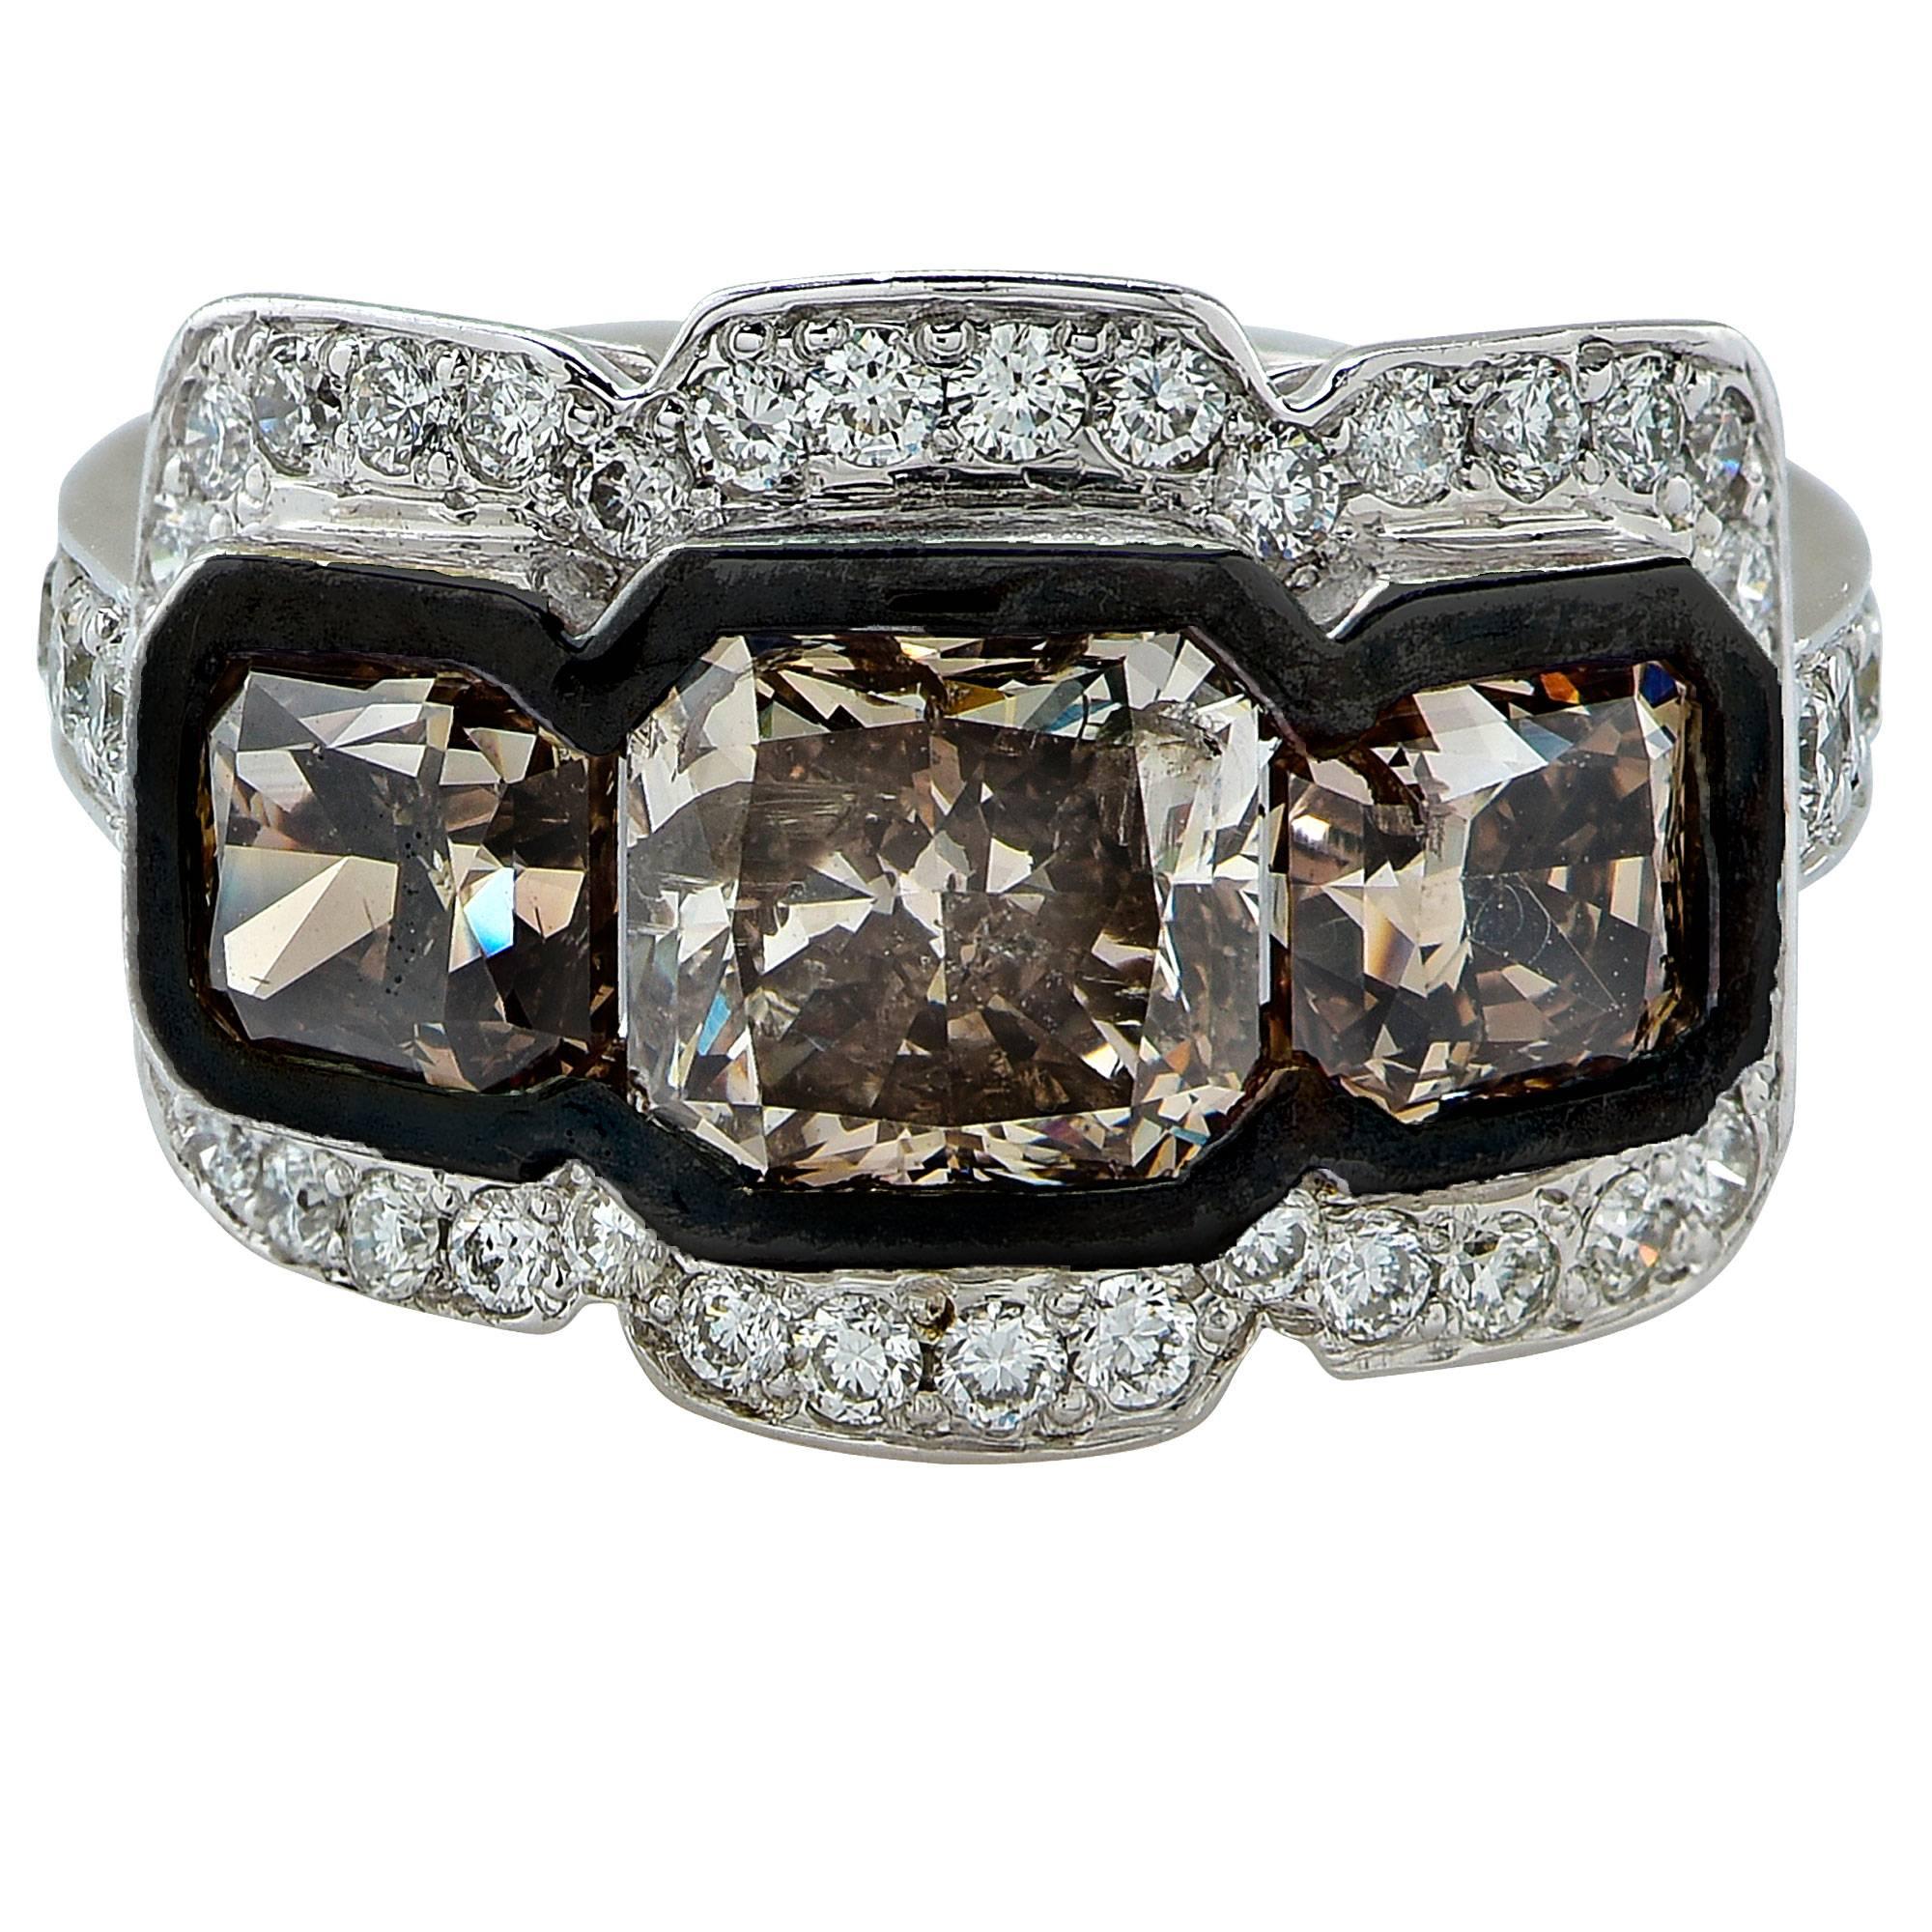 Striking ring crafted in 18 Karat white gold featuring 3 natural Brown Princess Cut diamonds weighing approximately 4.00 carats total, adorned by 48 round brilliant cut diamonds weighing approximately .74 carats total, F Color and VS Clarity. This